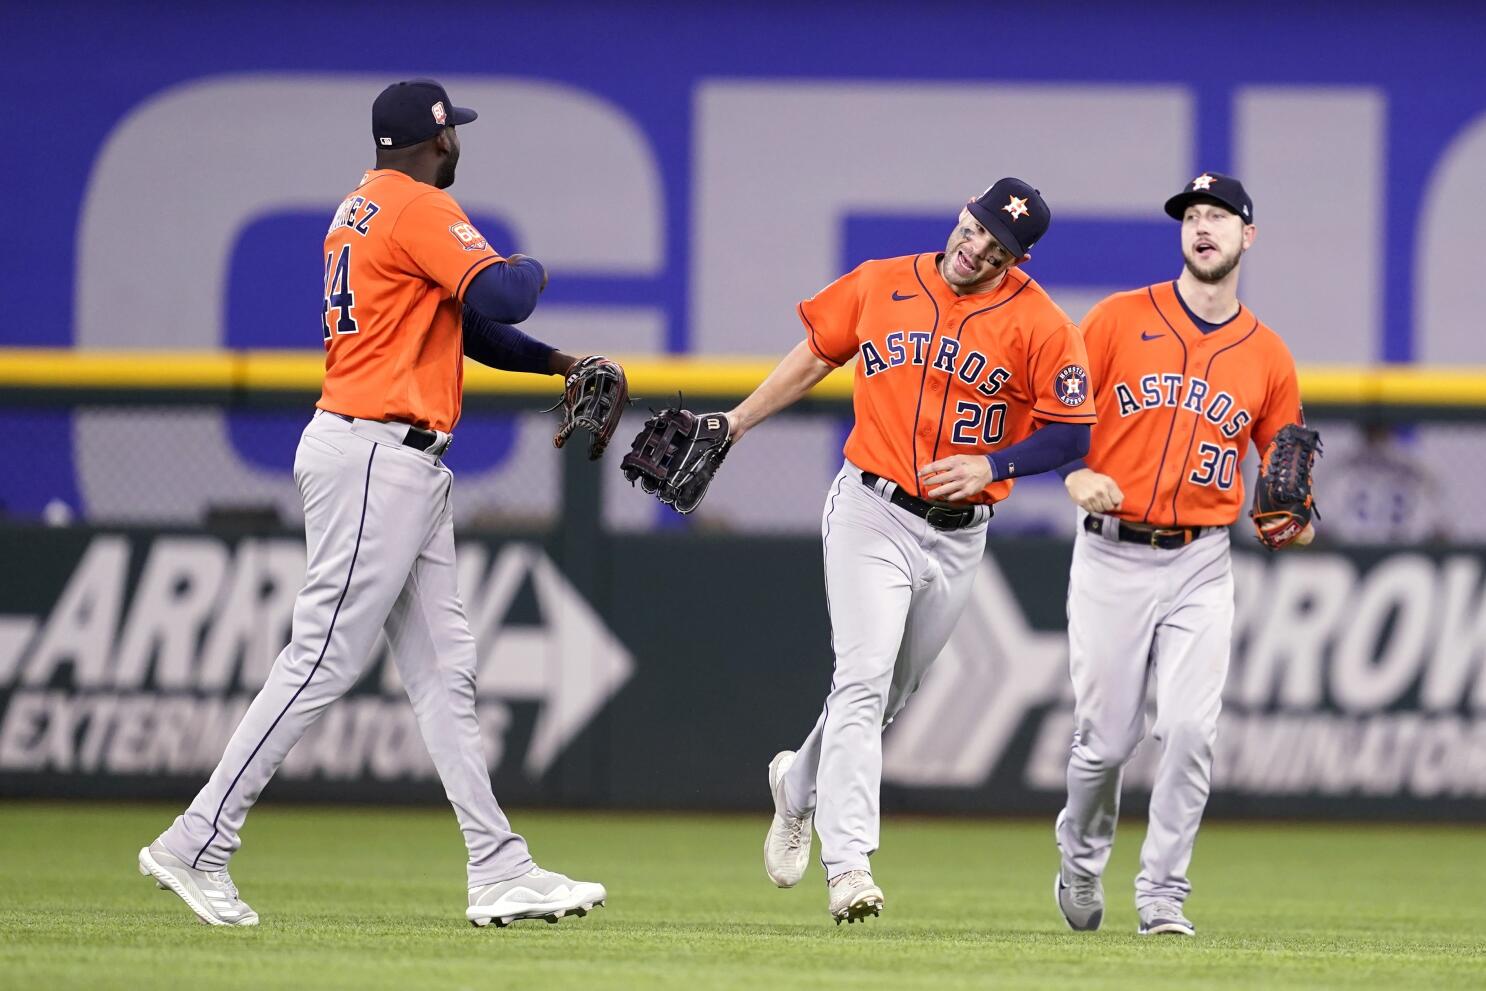 It's all business for Marwin Gonzalez against ex-Astros teammates